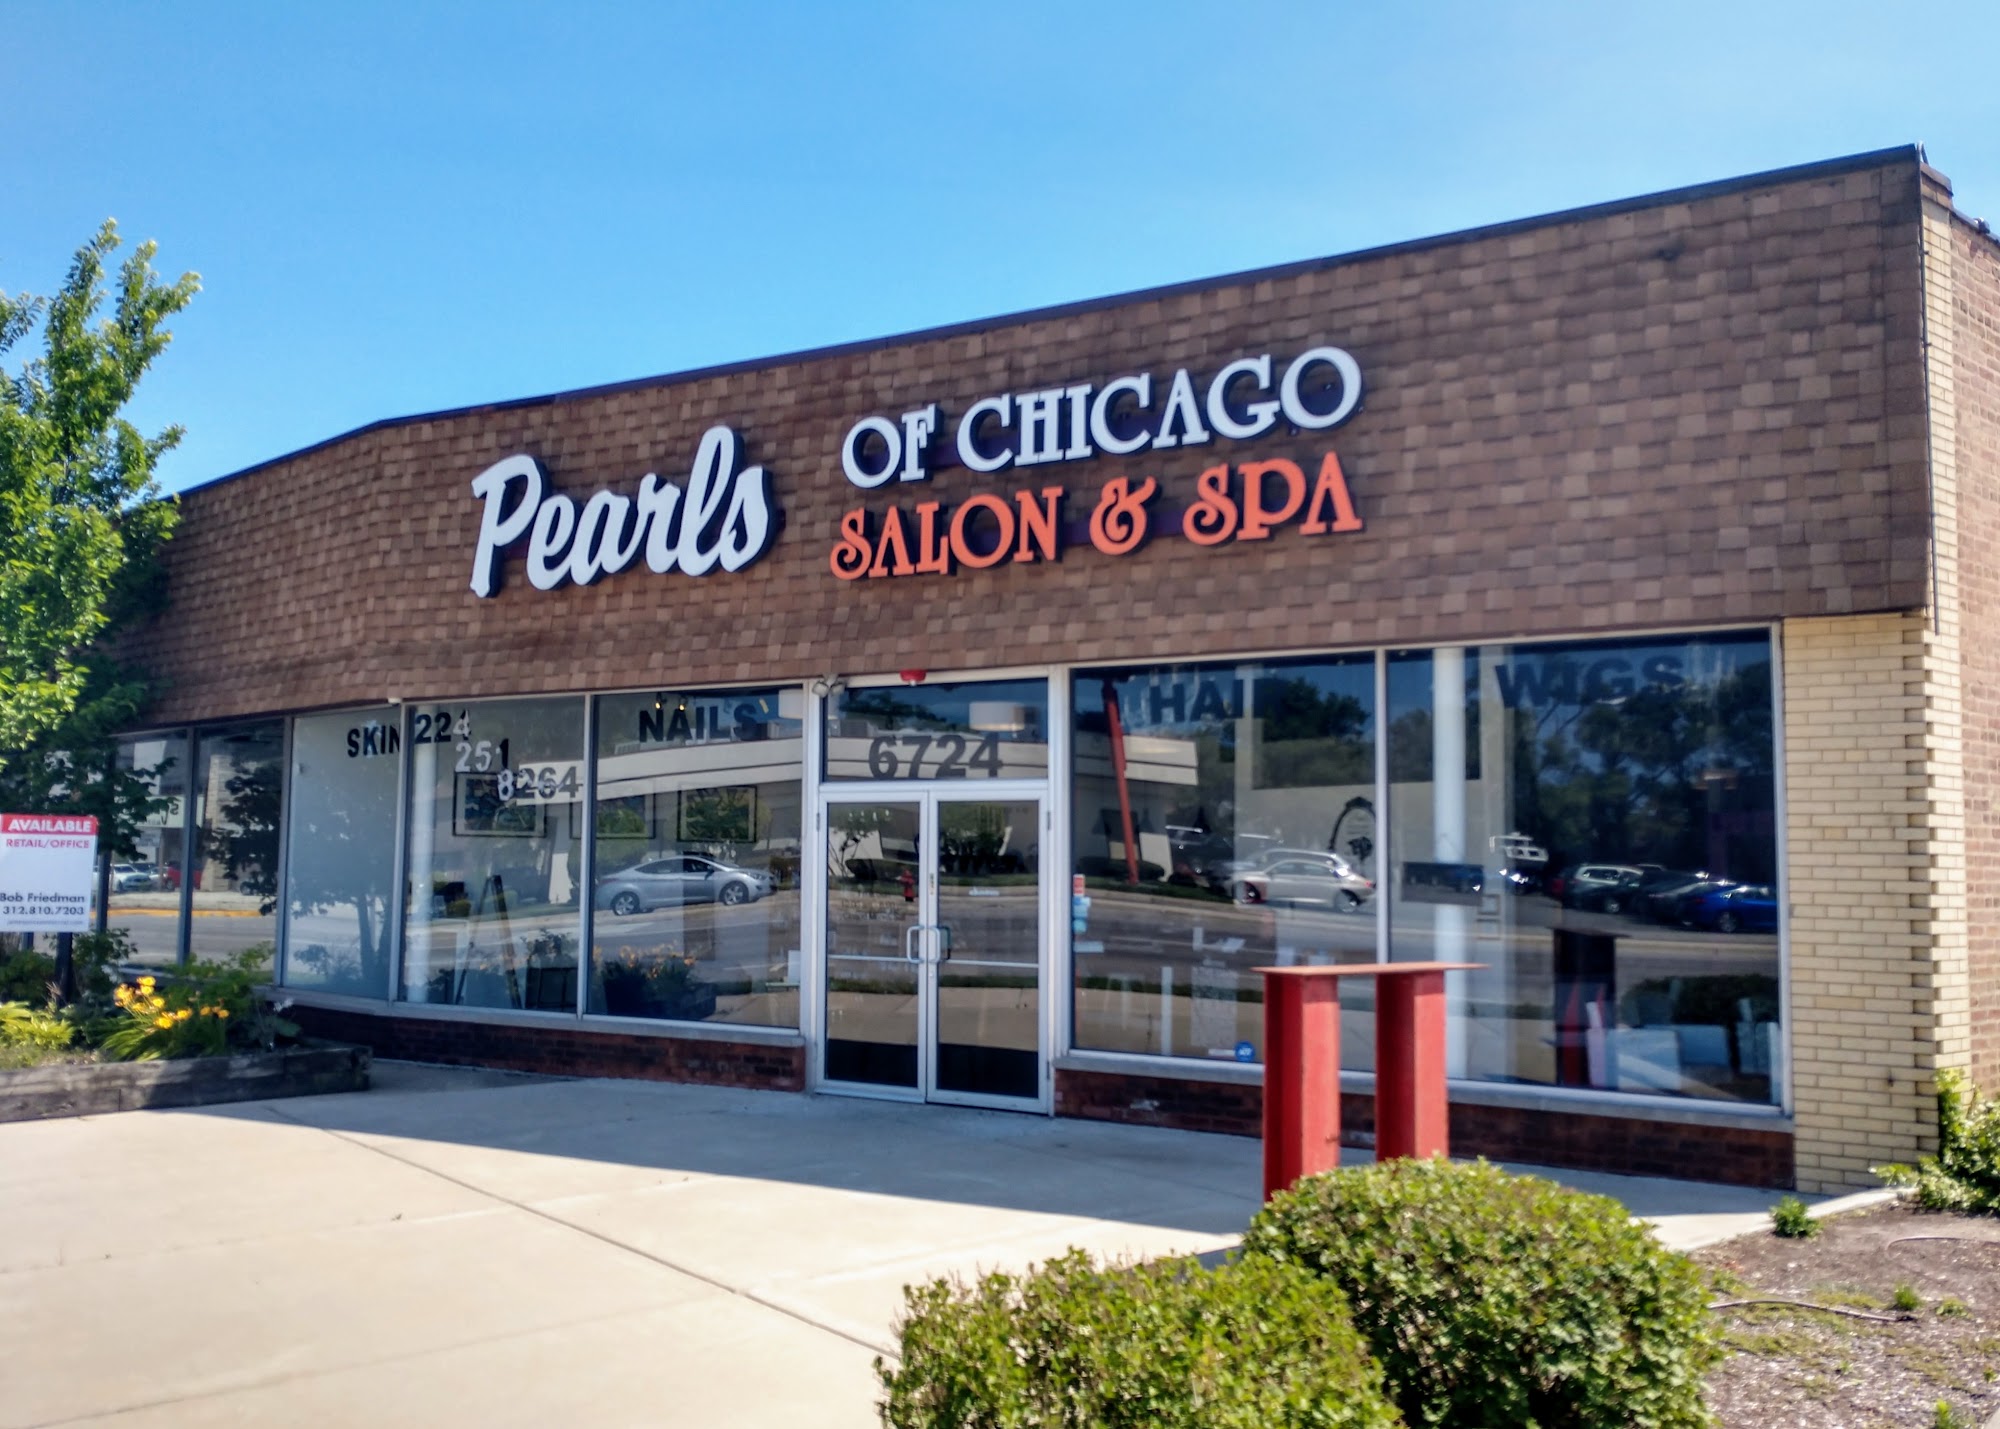 Pearls of Chicago 3916 Touhy Ave, Lincolnwood Illinois 60712